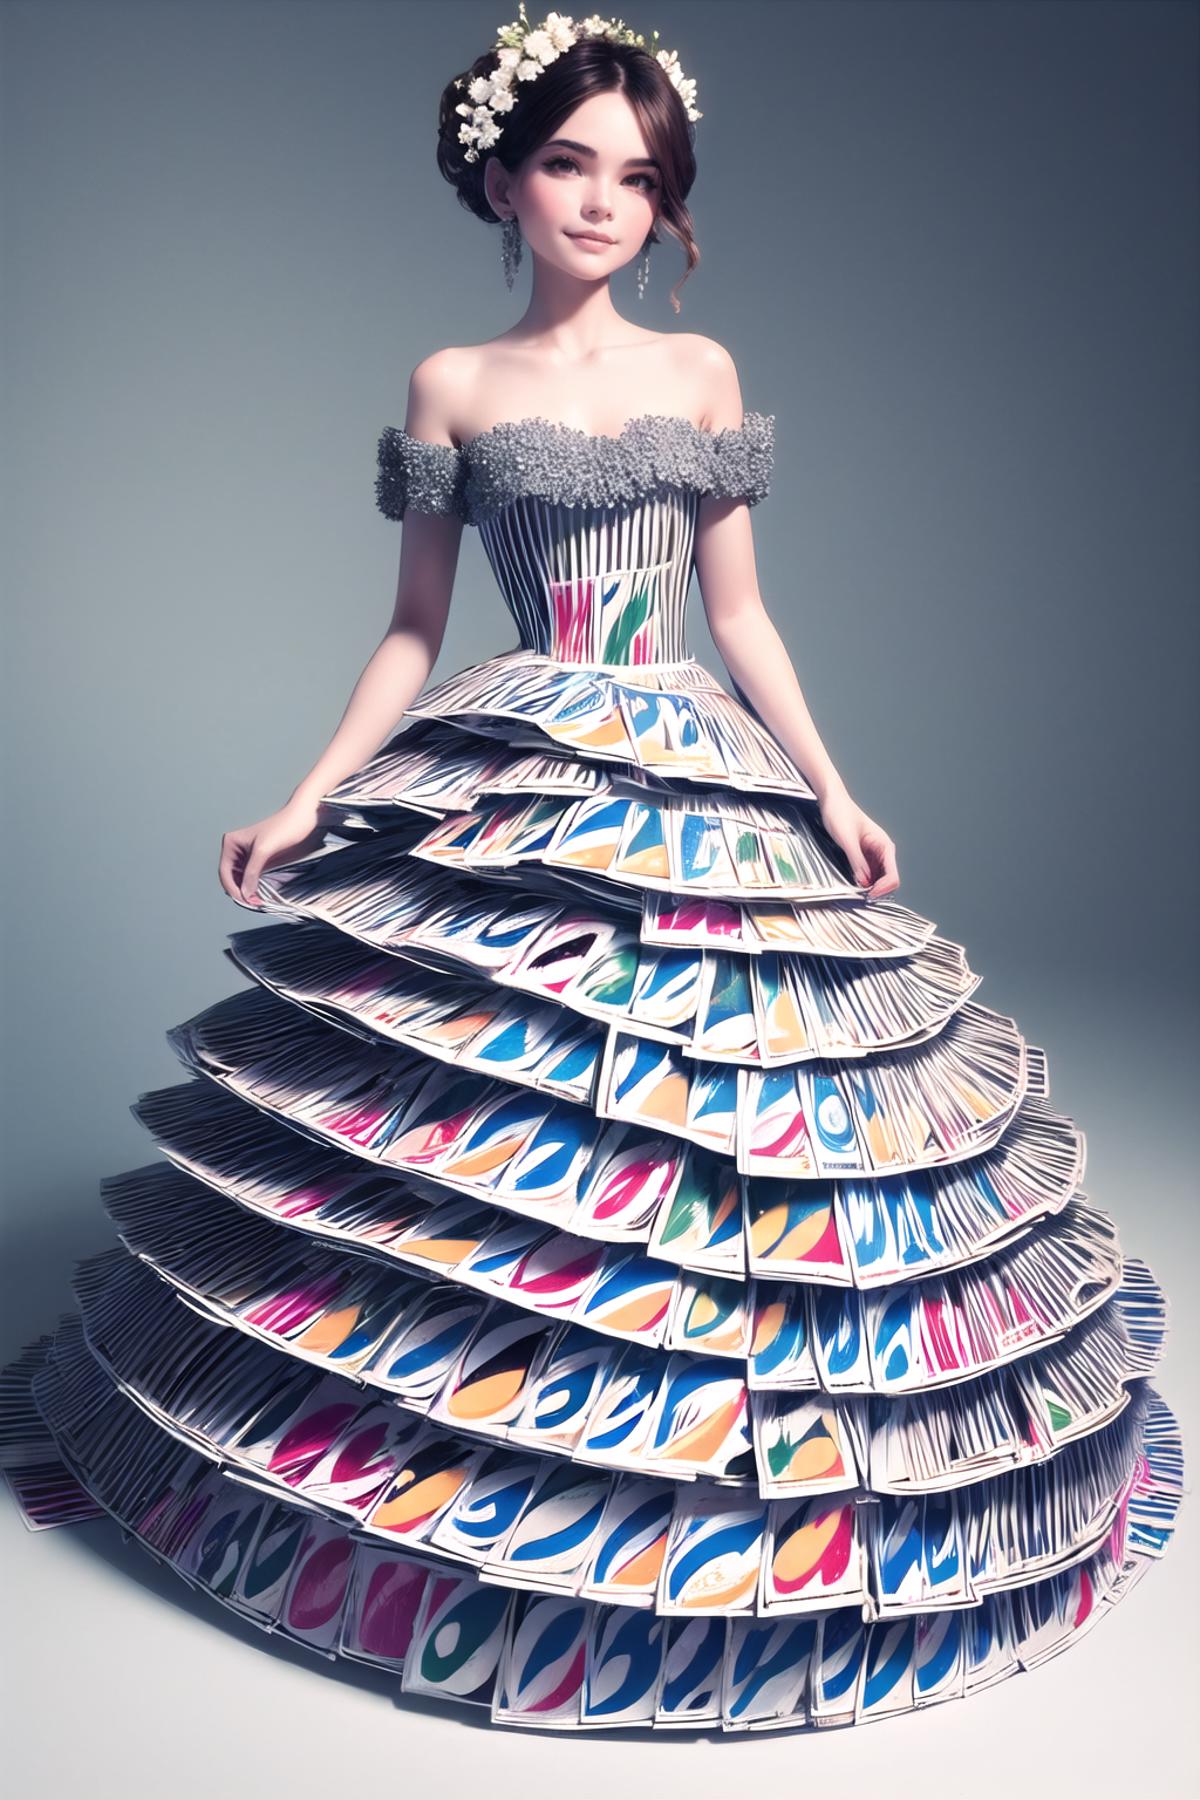 Uno Gowns | Playing Cards Gowns | a Meme Dress image by wrench1815